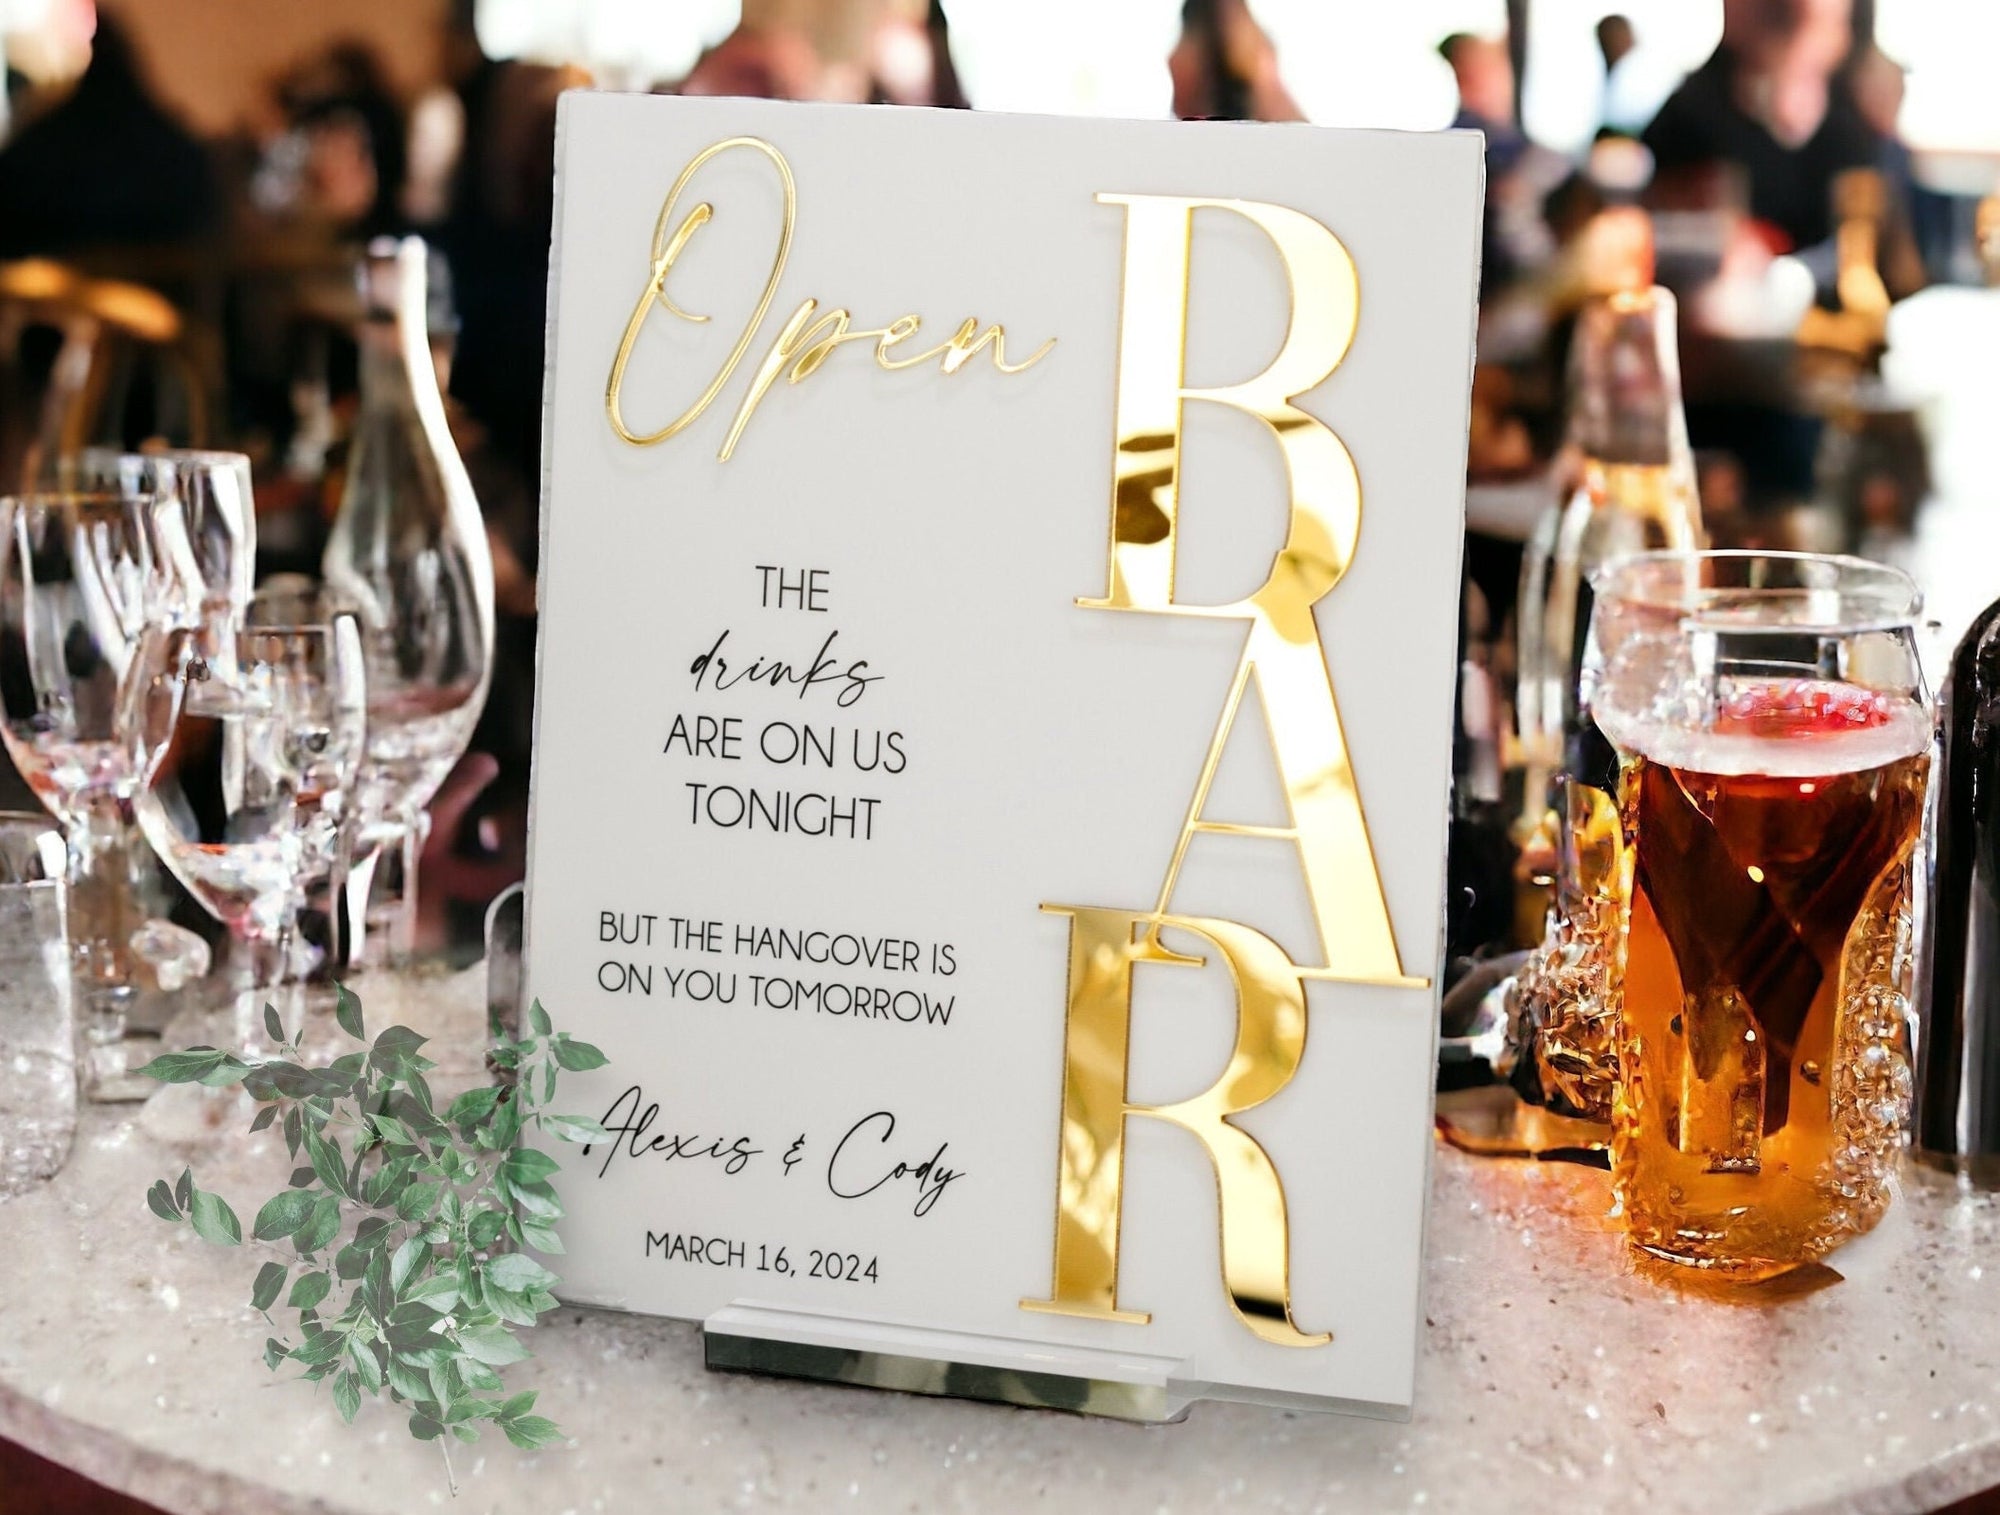 3D Mirror Gold Foil Open Bar Menu Signature Cocktails Custom Minimalist Acrylic Wedding Sign, Drinks on Us Hangover On You Signage